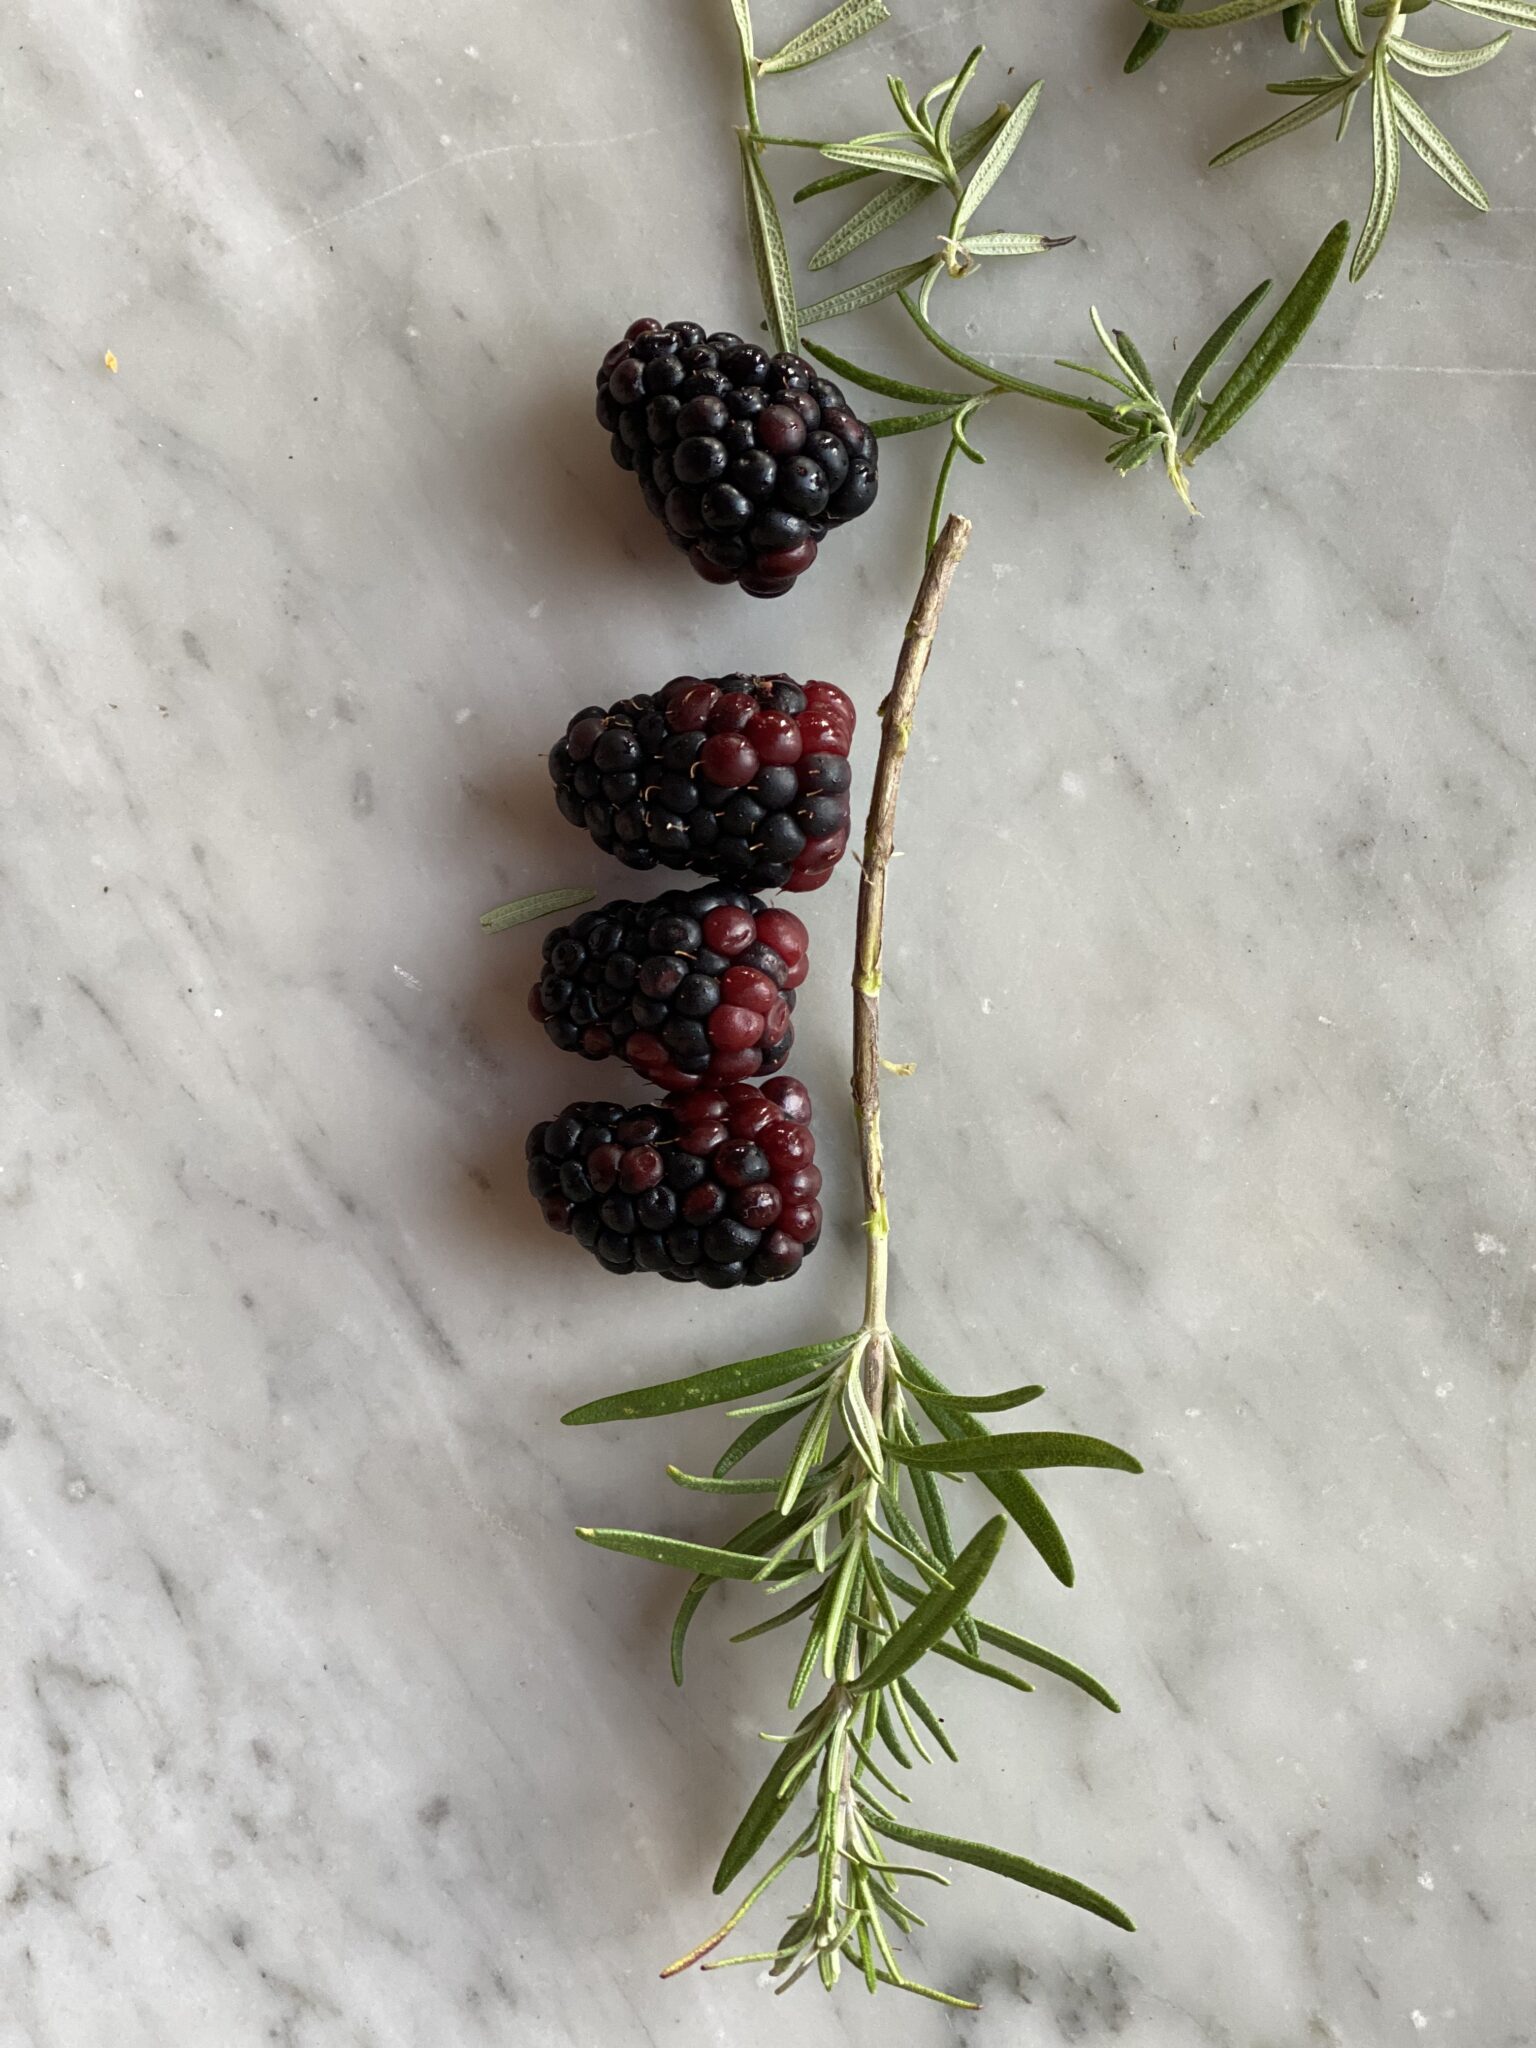 Blackberries and a twig of rosemary